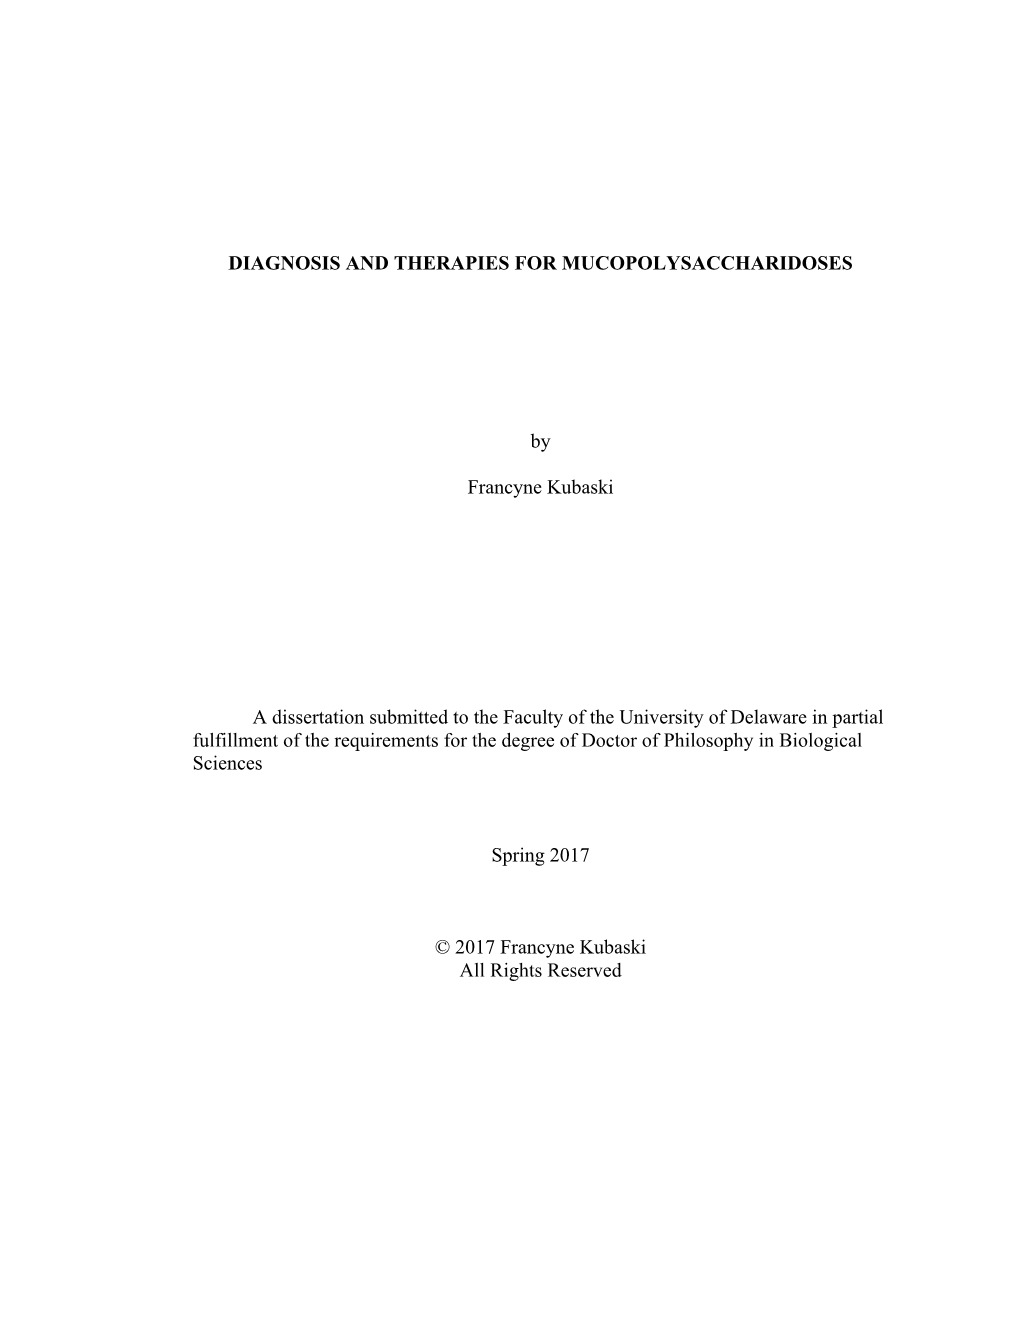 DIAGNOSIS and THERAPIES for MUCOPOLYSACCHARIDOSES by Francyne Kubaski a Dissertation Submitted to the Faculty of the University